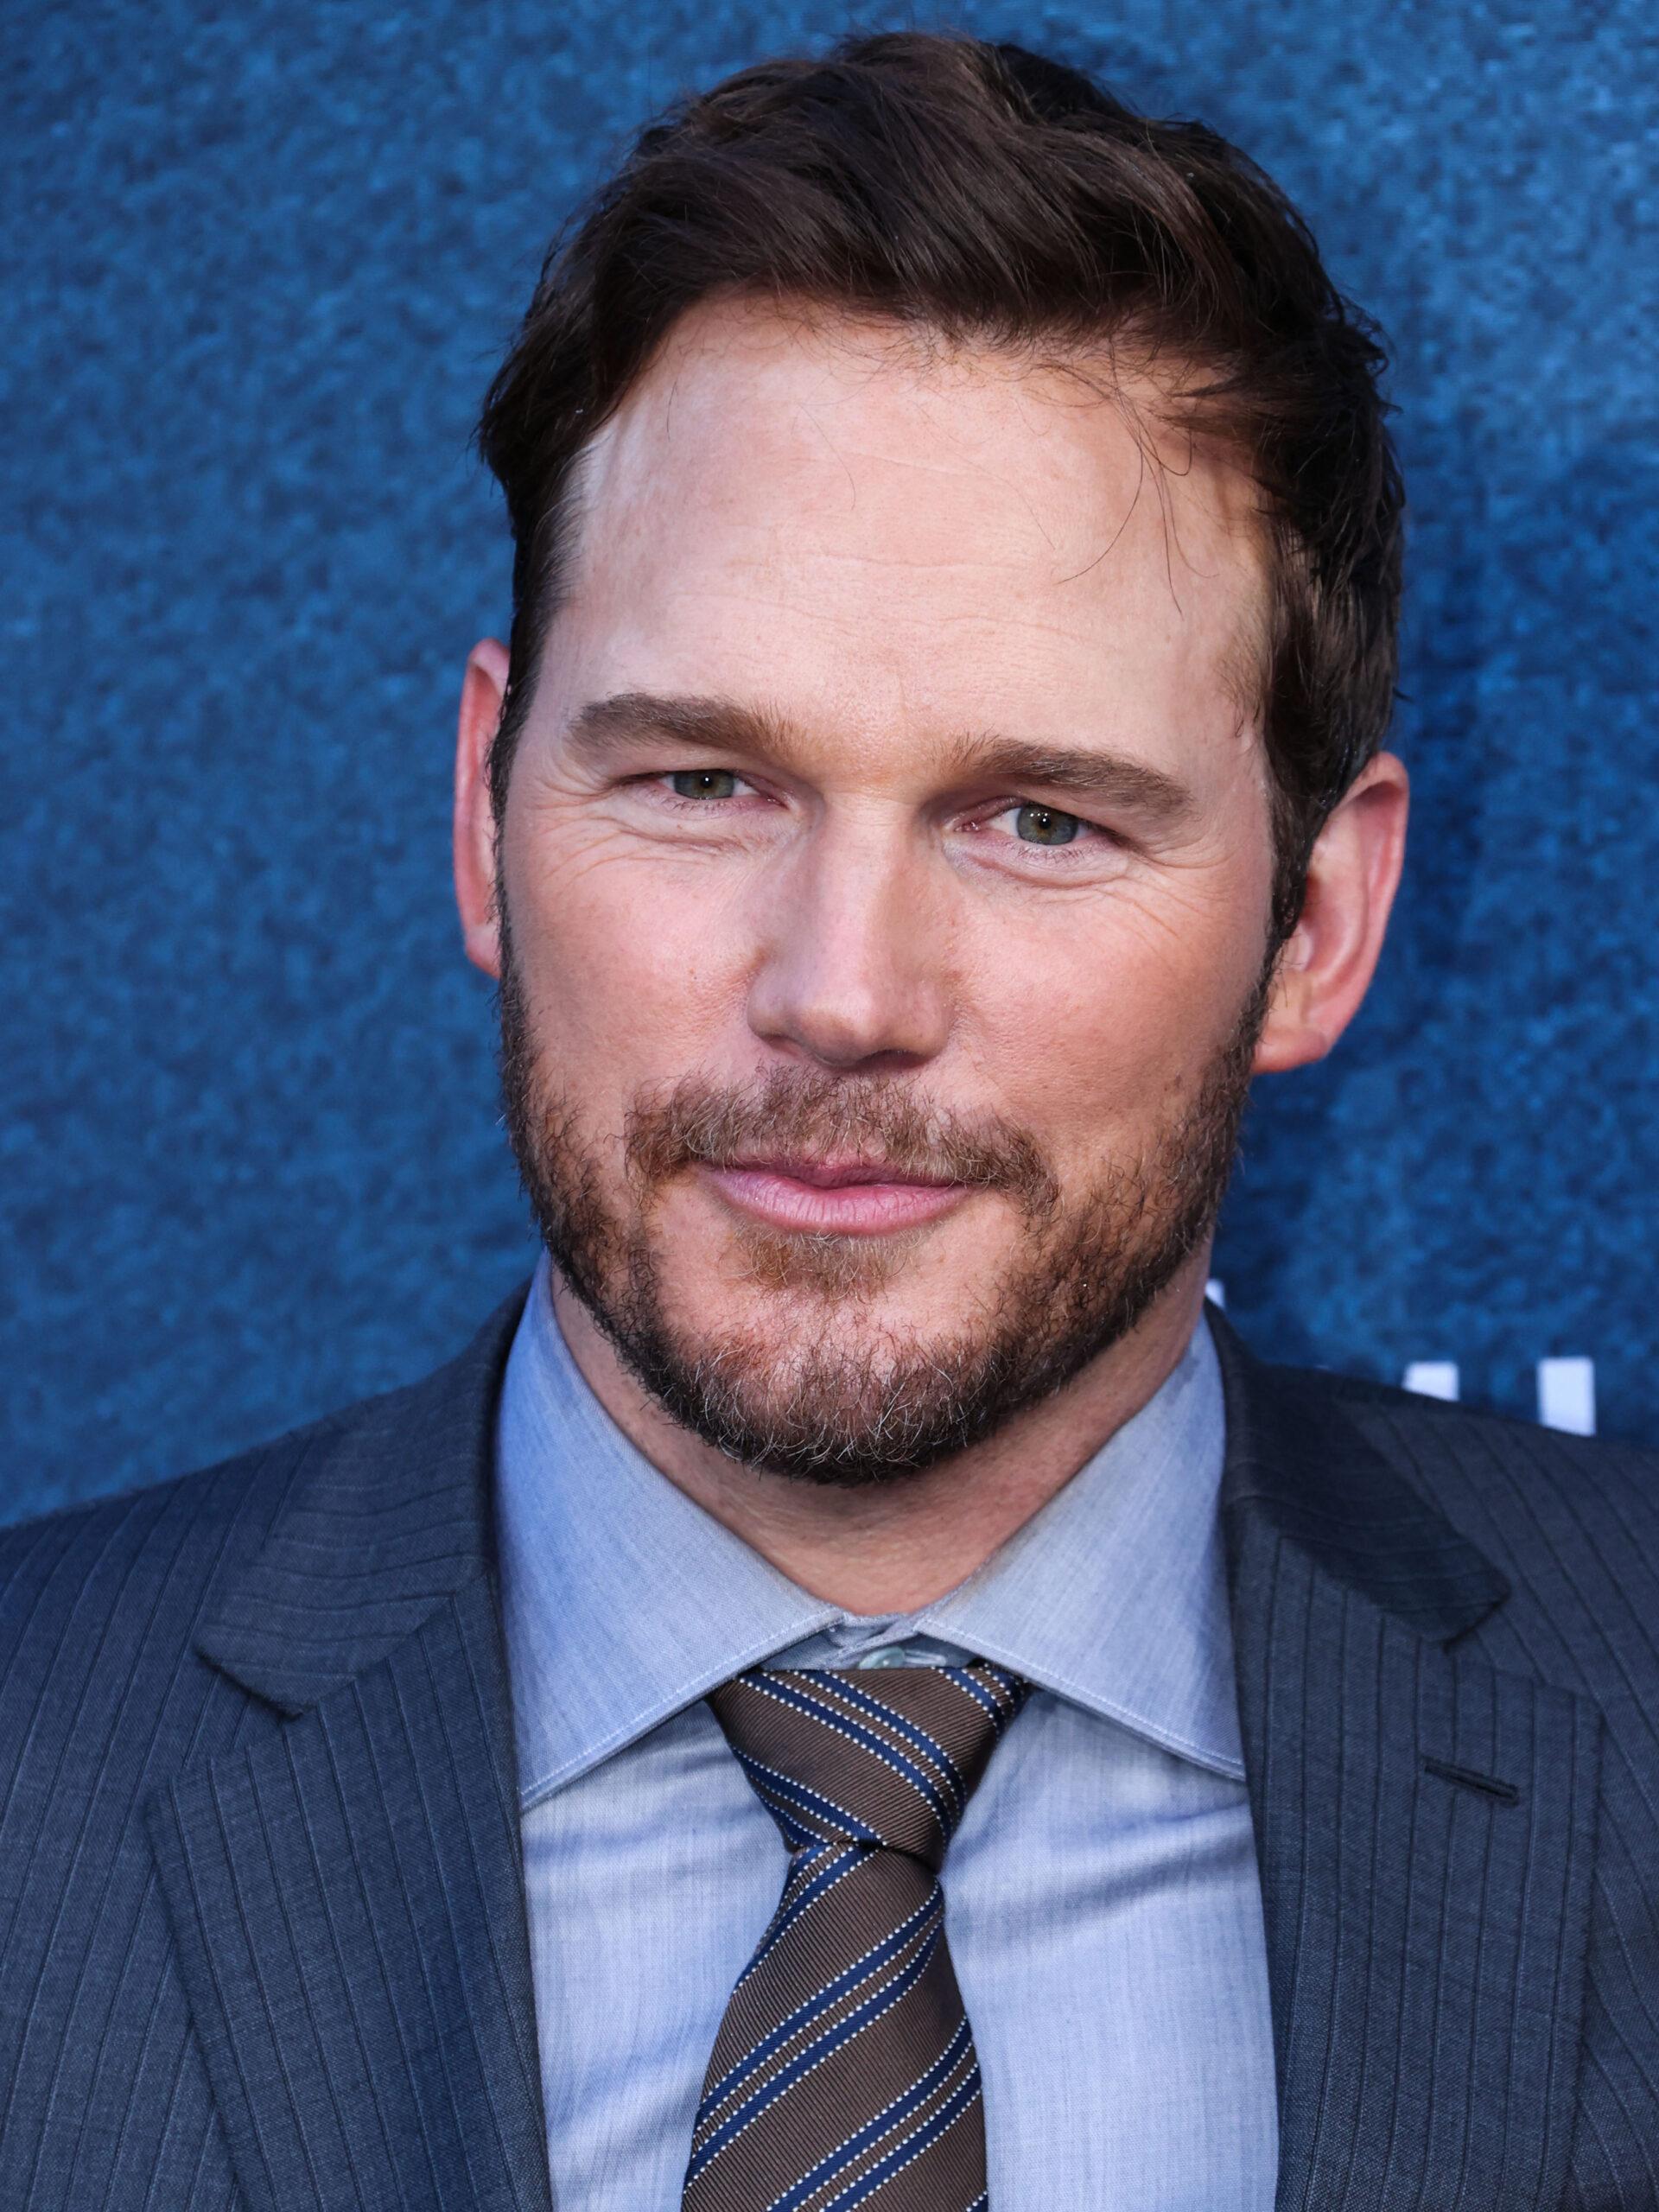 A video of Chris Pratt rapping an Eminem song is resurfacing, and the 'Guardians of the Galaxy' actor is reacting.